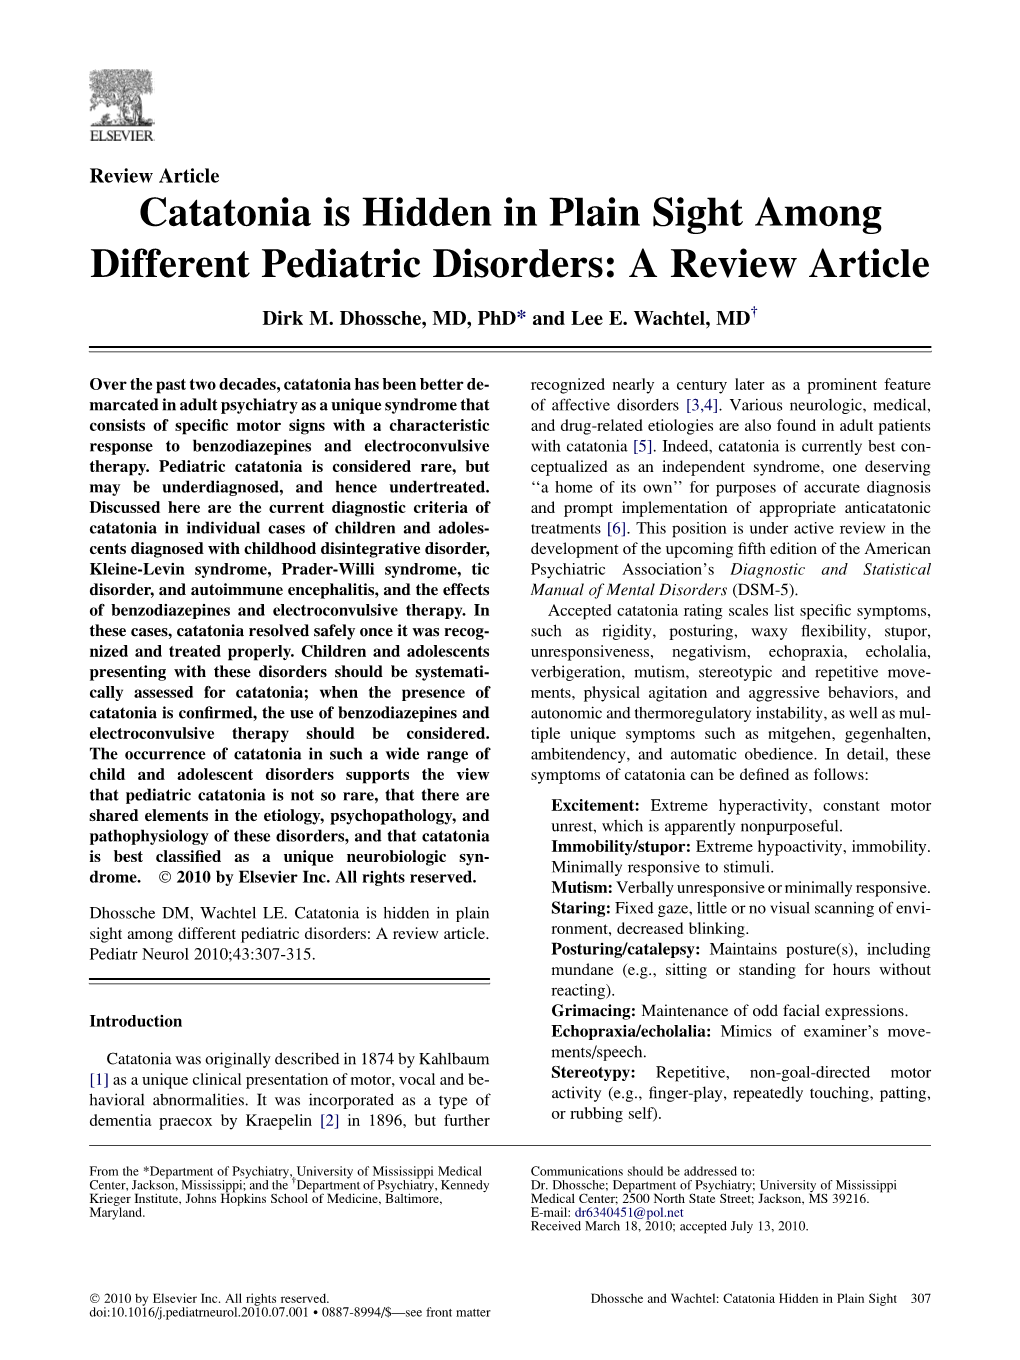 Catatonia Is Hidden in Plain Sight Among Different Pediatric Disorders: a Review Article